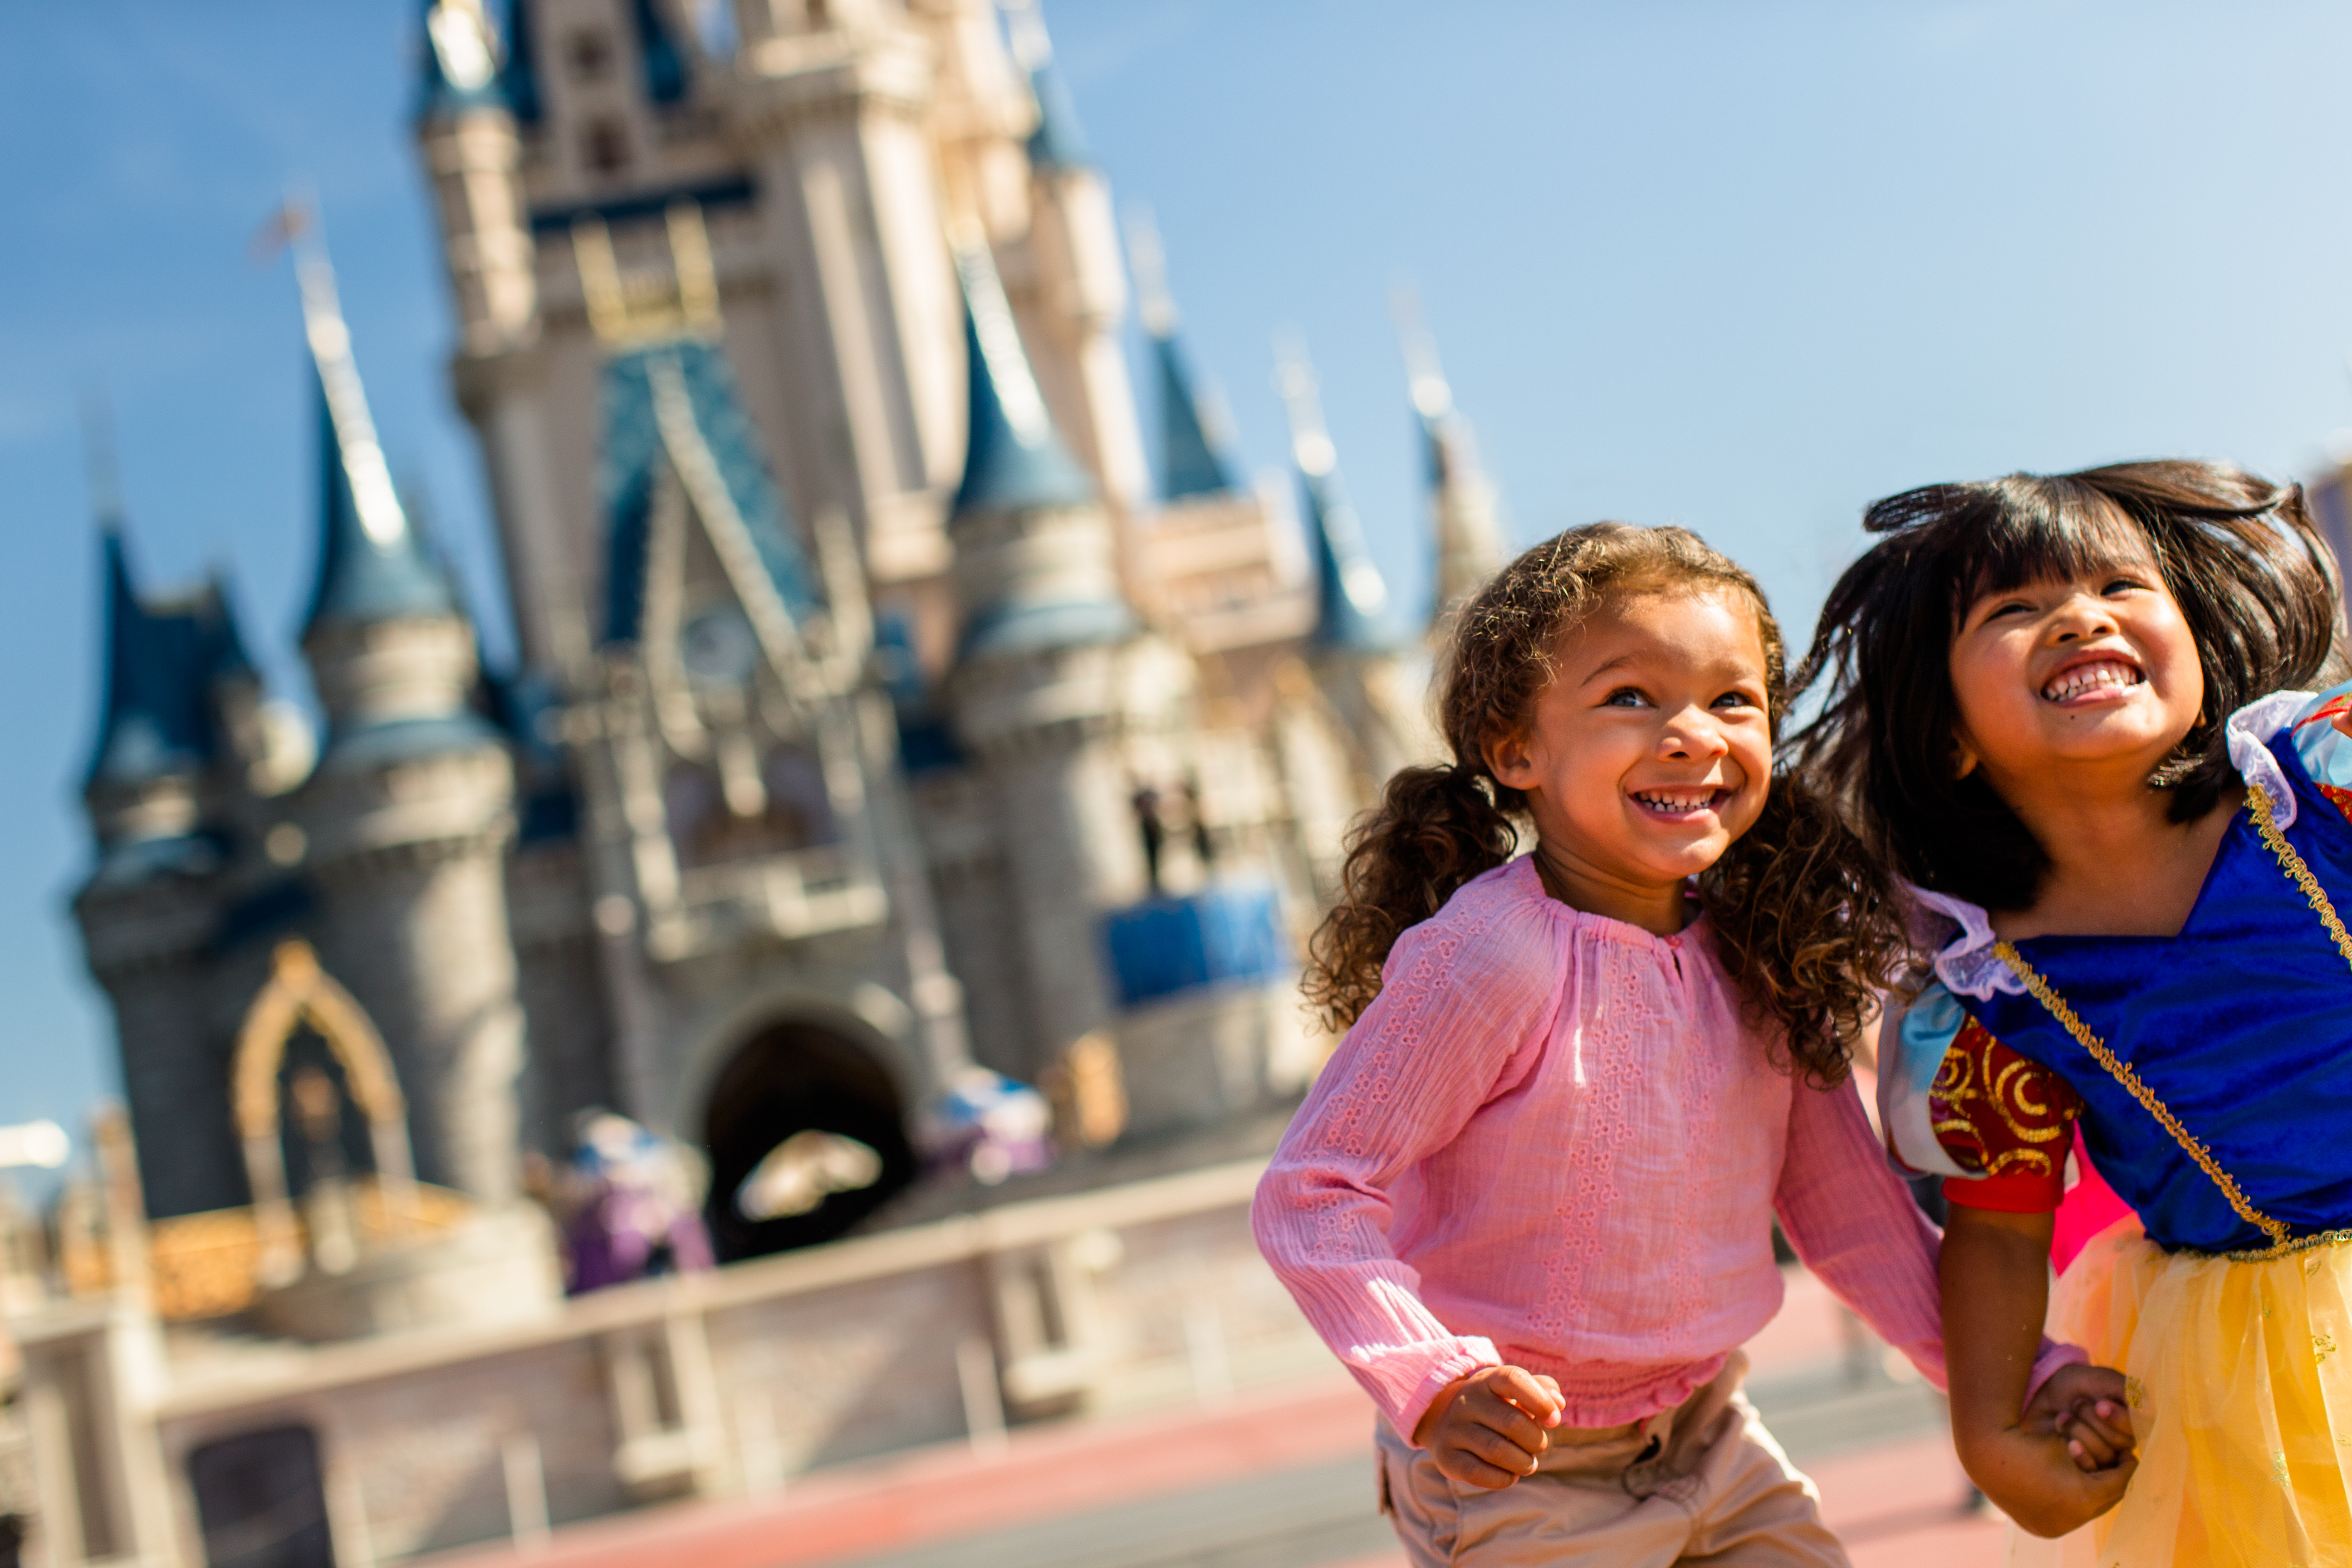 NEW! 2018 Walt Disney World Vacation Packages ready to book!